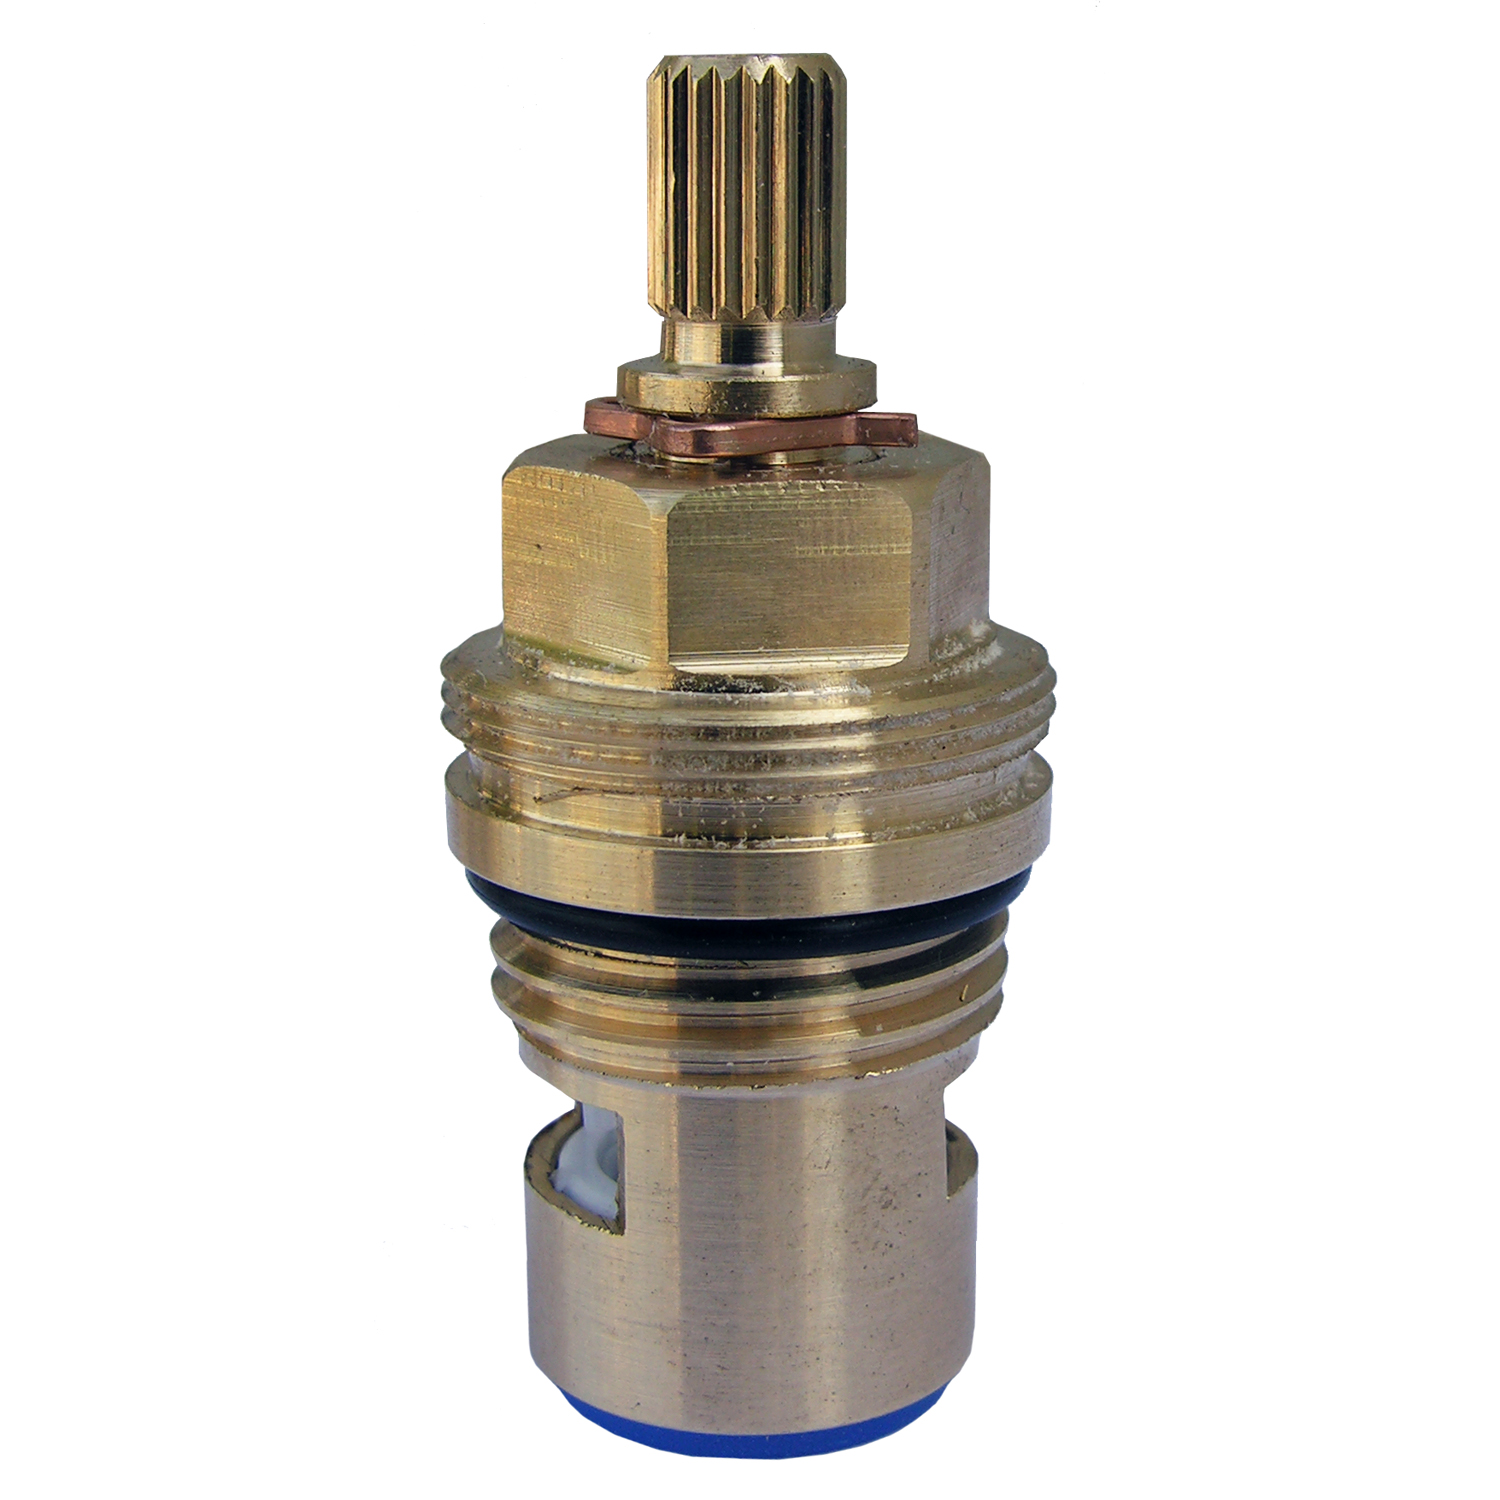 Lasco S-166-2NL Cold Faucet Cartridge, 1/2 in Connection, Brass/Ceramic, For: 3804 Milwaukee Faucets